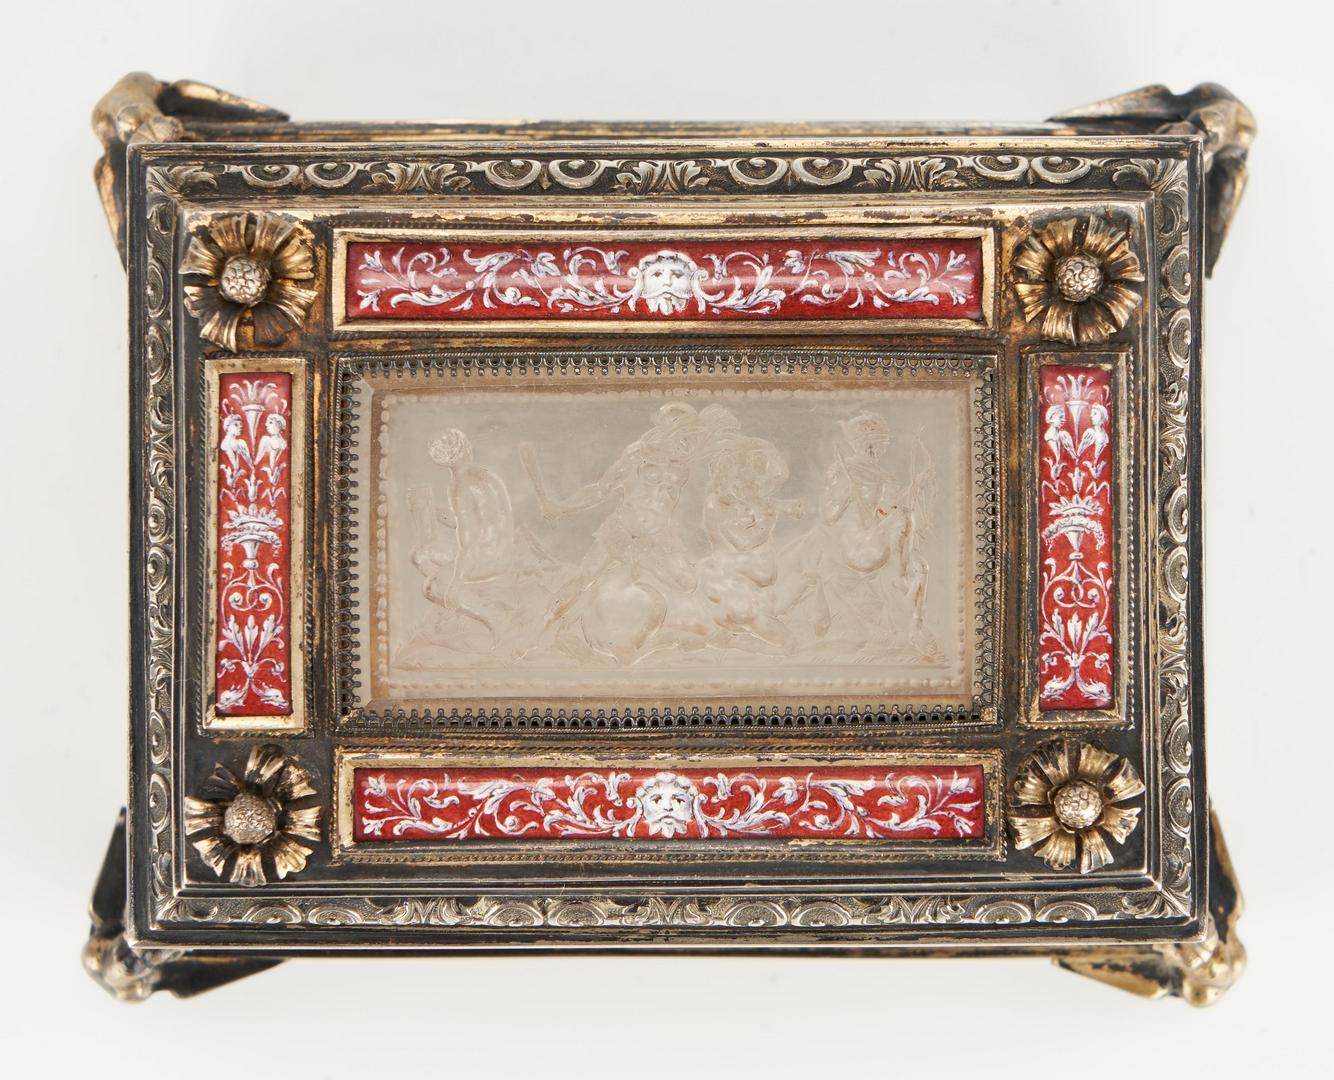 Lot 74: Viennese Gilt Silver, Enamel and Crystal Casket